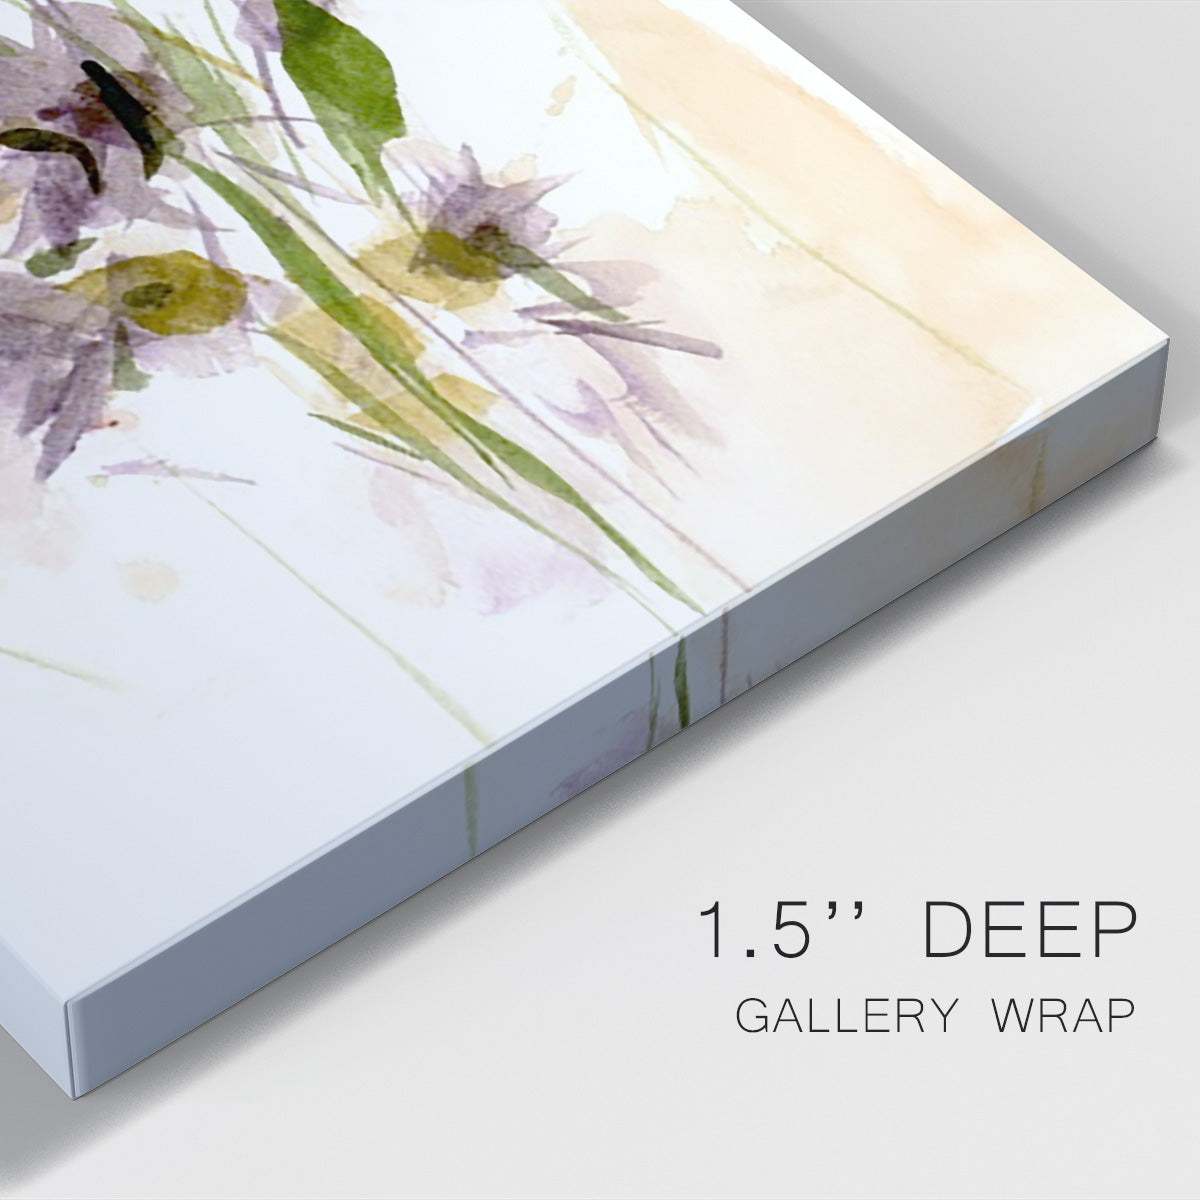 After Rain III Premium Gallery Wrapped Canvas - Ready to Hang